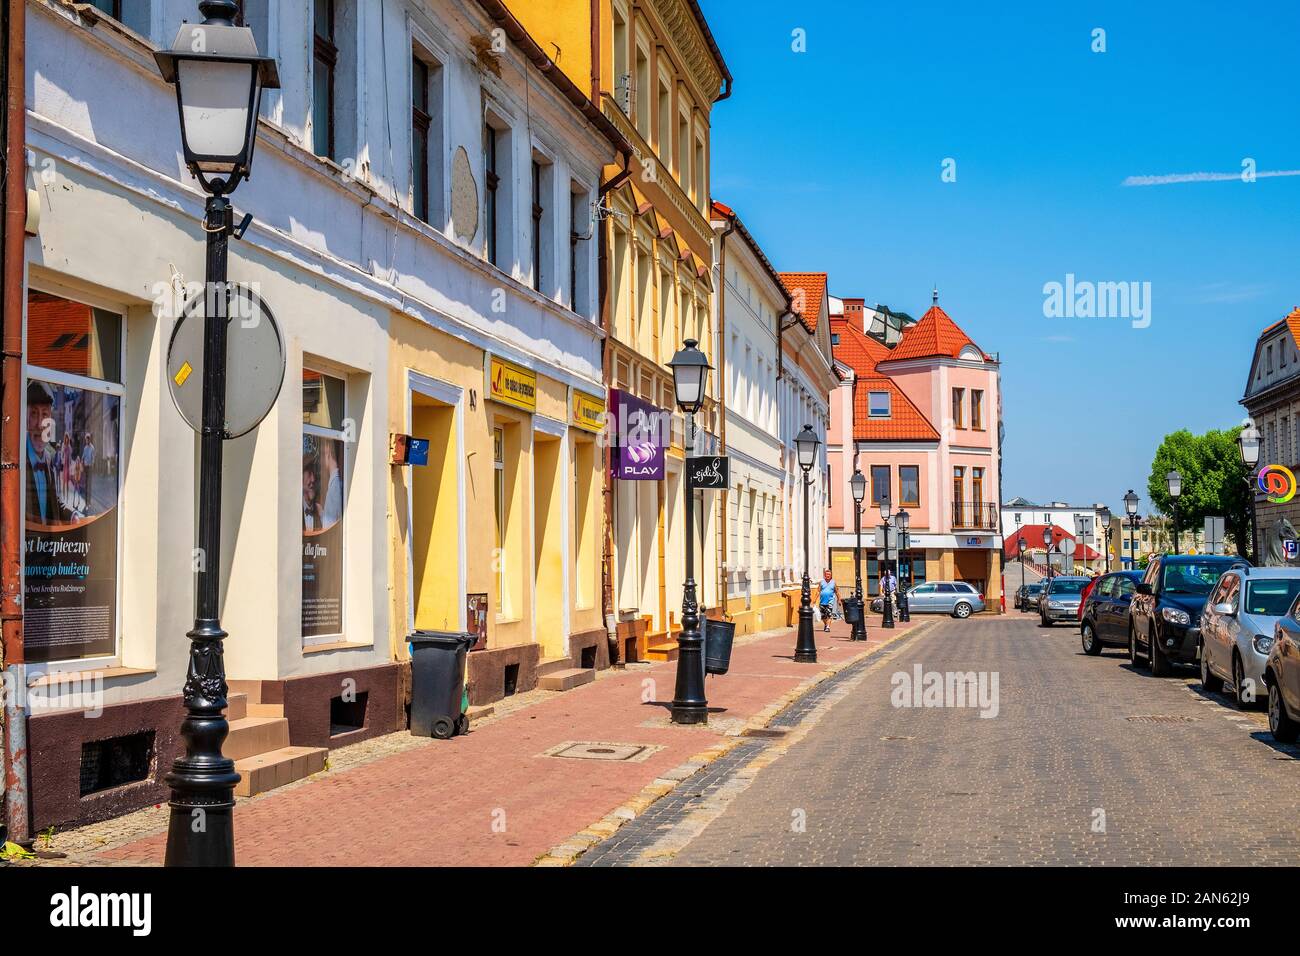 Konin, Greater Poland province / Poland - 2019/06/26: Historic tenements at the market square - Plac Wolnosci square - in Old Town quarter of Konin Stock Photo